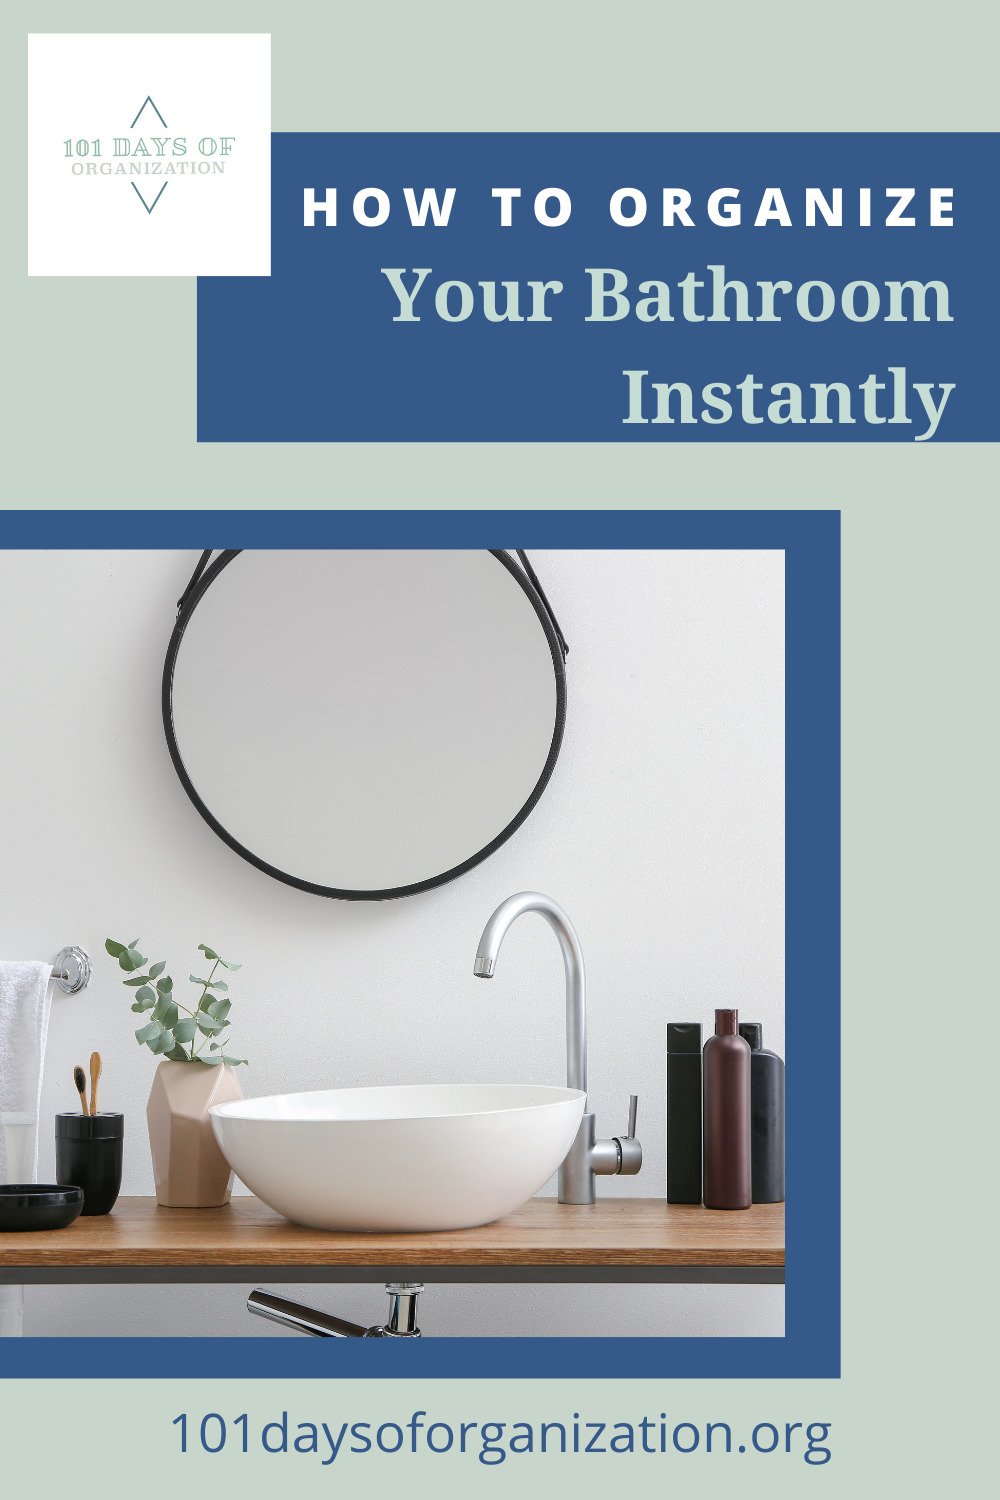 101daysoforganization.org knows all the ins and outs of seamless organization! Find simple tricks to get your life in order. Check out these 10 minute ideas to get your bathroom organized today!